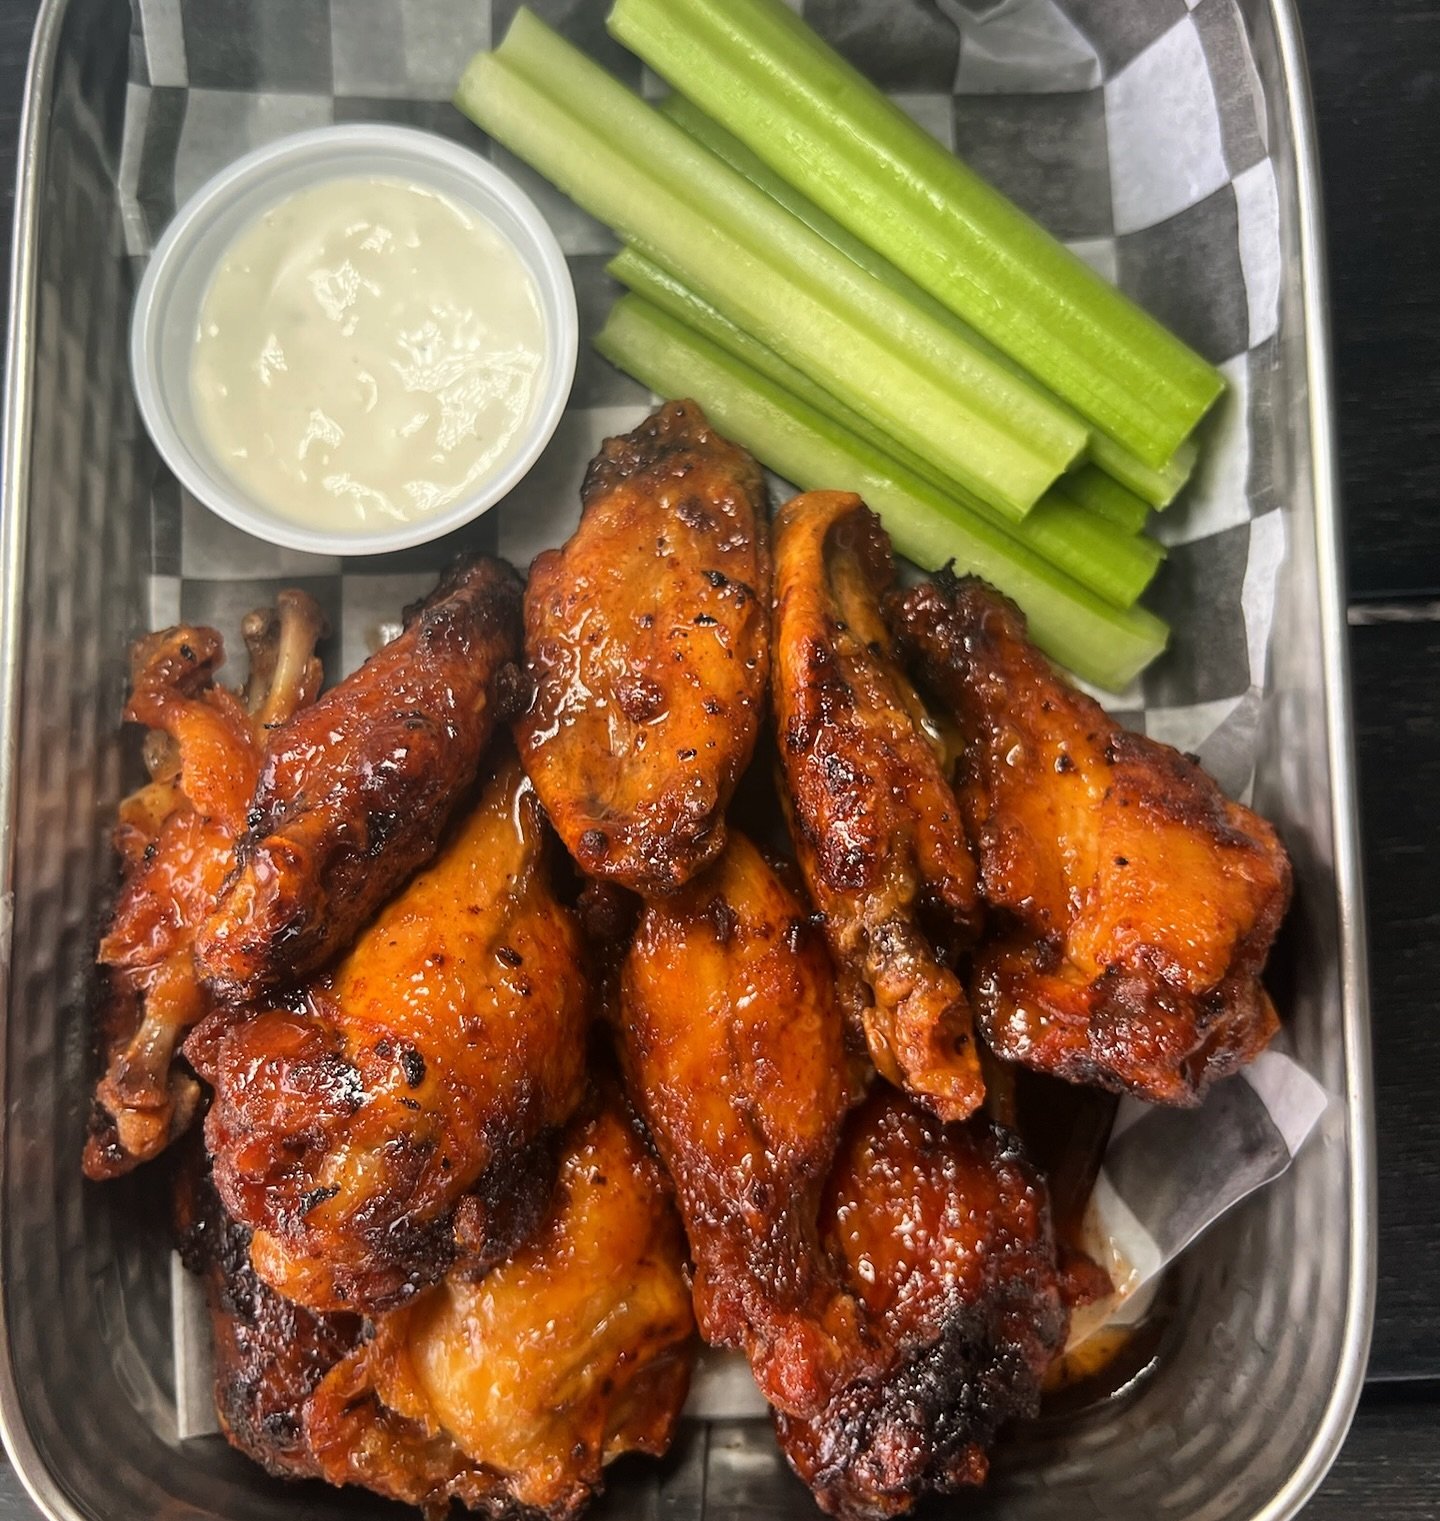 It&rsquo;s Hump Day with a wing special from 4-6pm! $1 wings during Happy Hour, $35 Surfside/Stateside buckets ALL night!

The sun is shining and the Patio is OPEN!